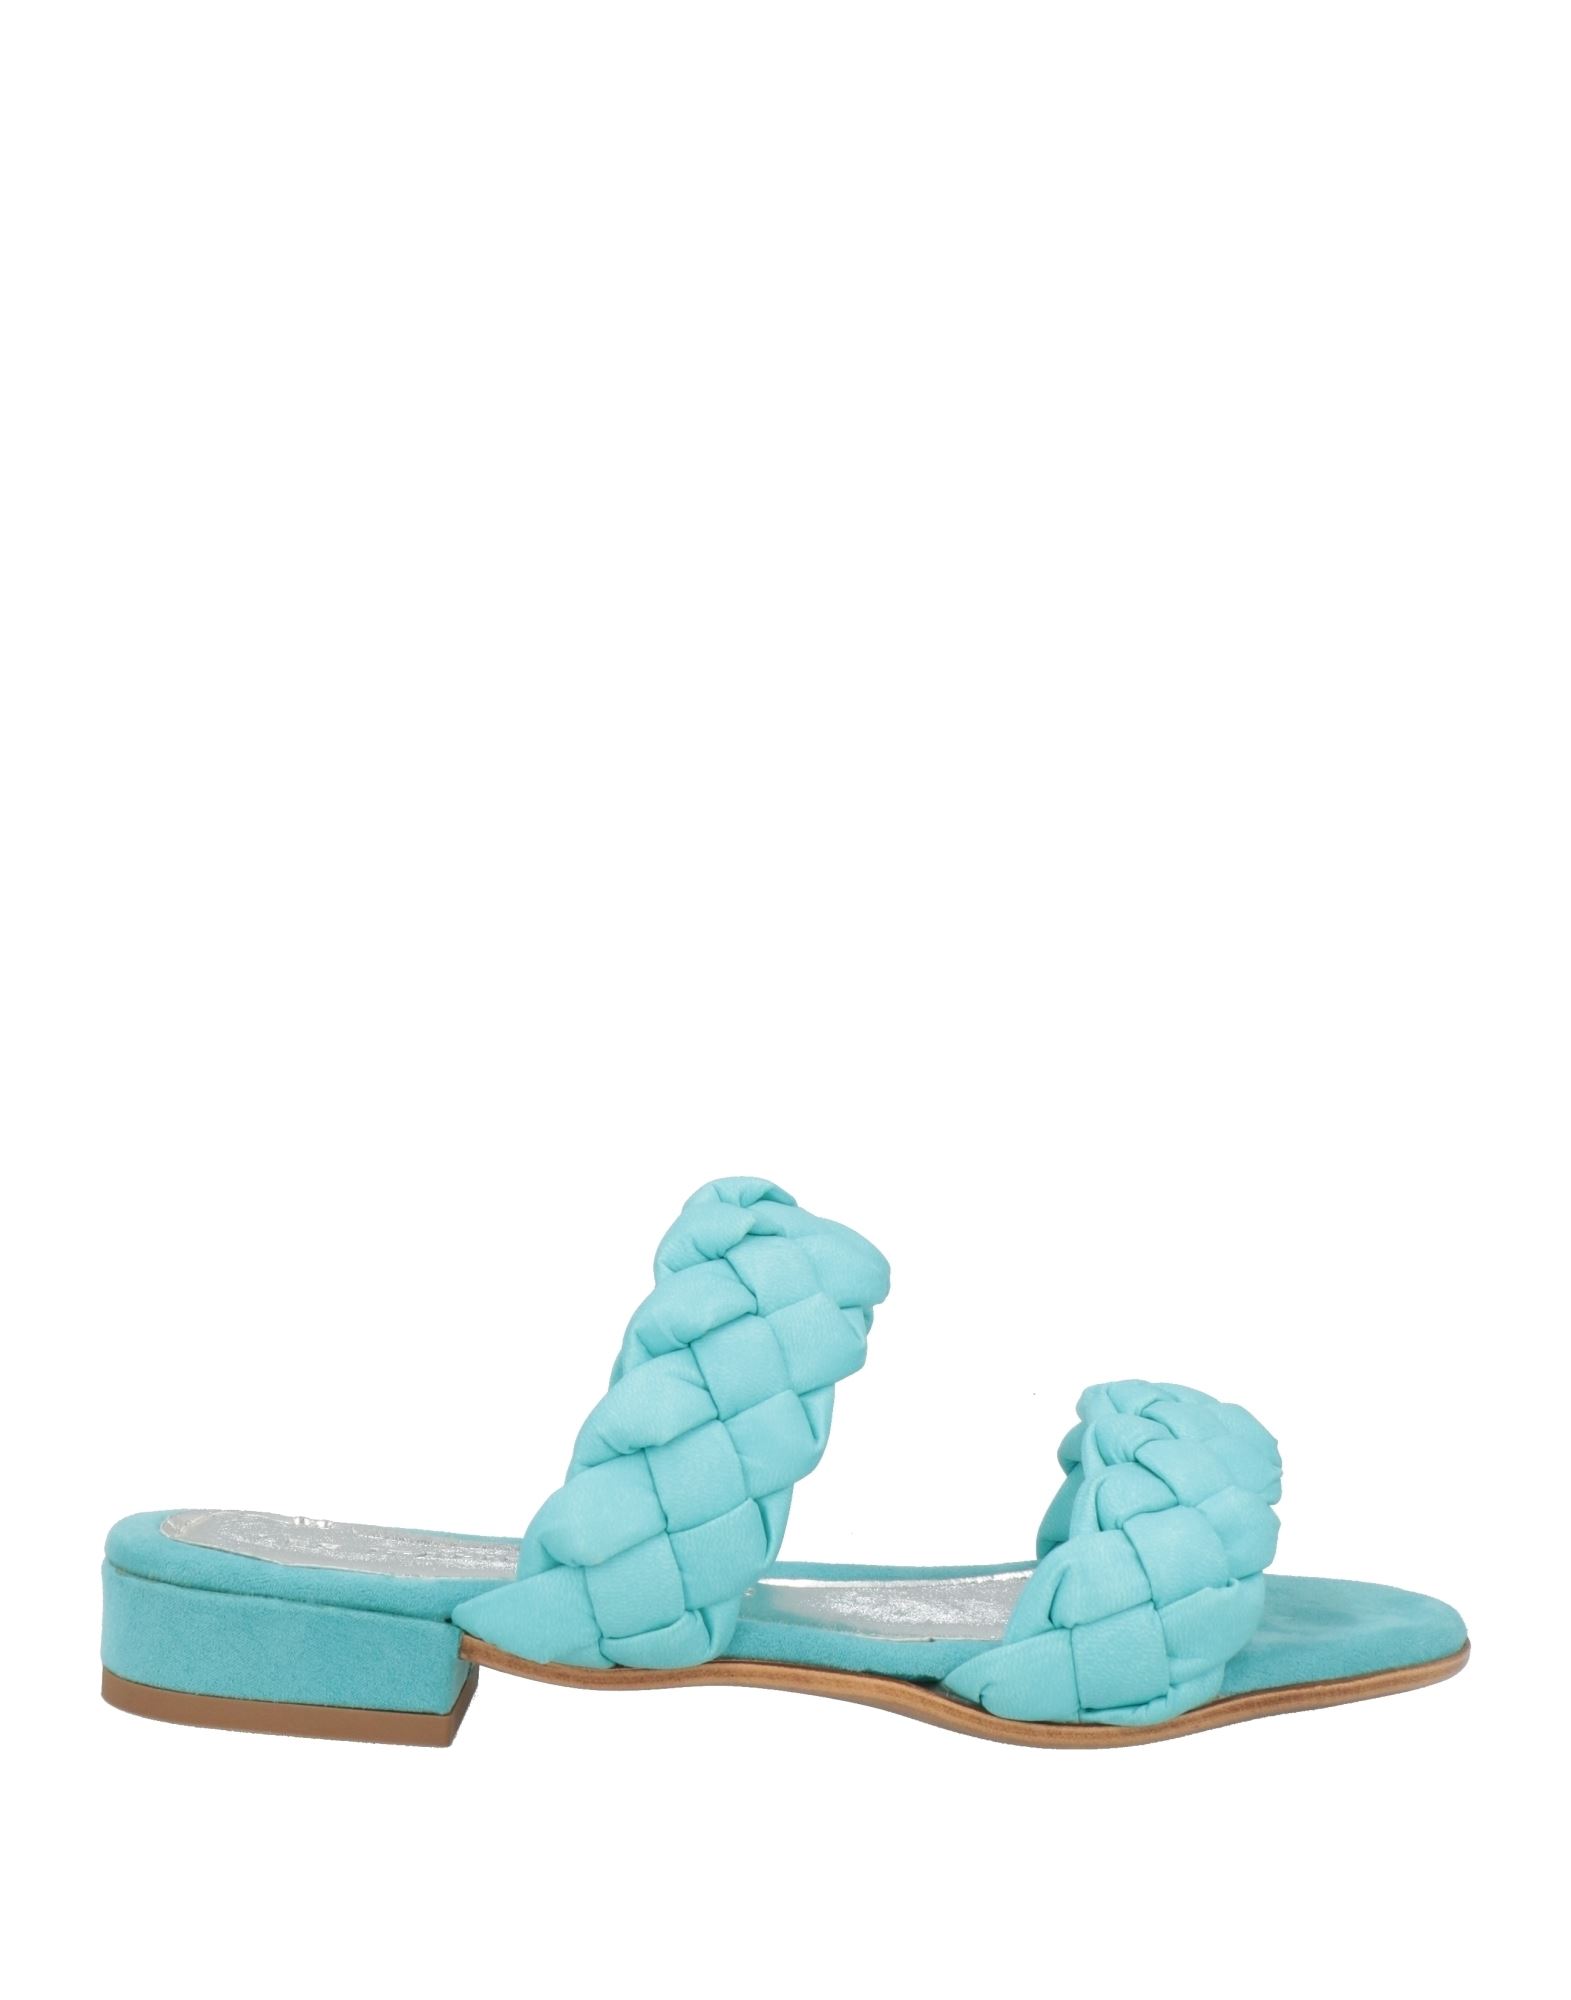 Les Italiennes Sandals In Turquoise